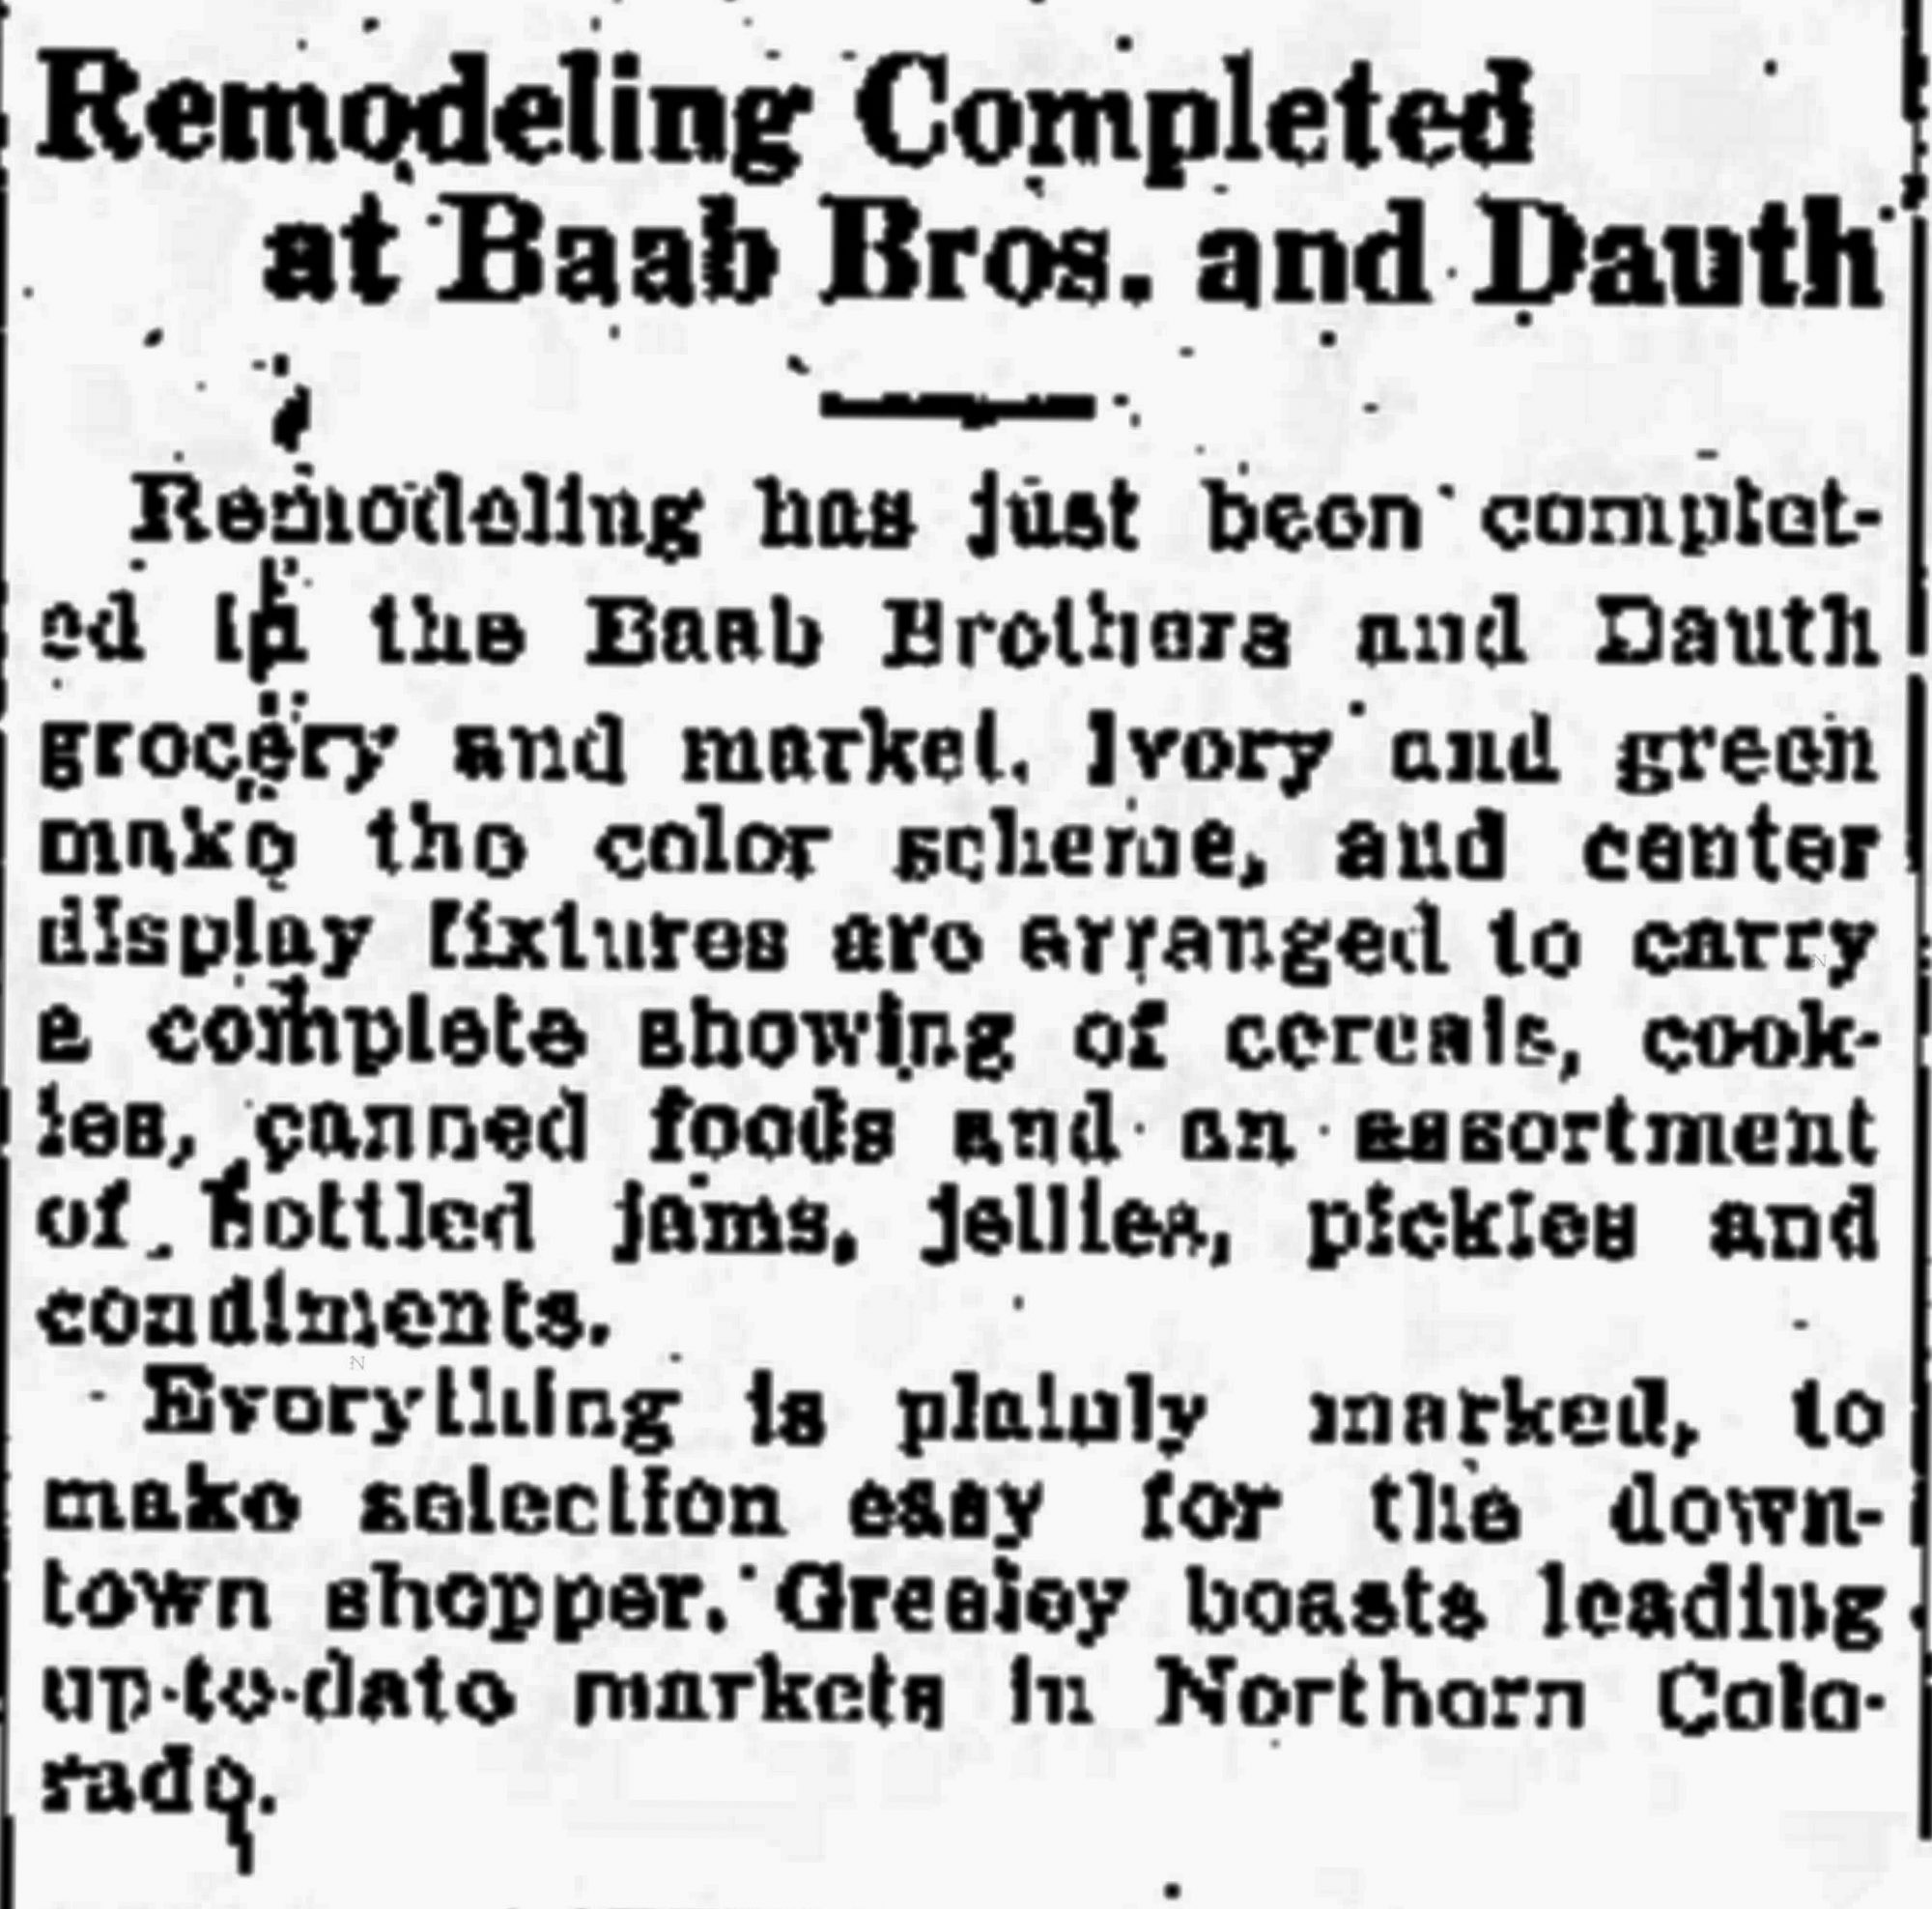 Dauth Family Archive - 1933-05-19 - Greeley Daily Tribune - Remodeling at George Dauths market